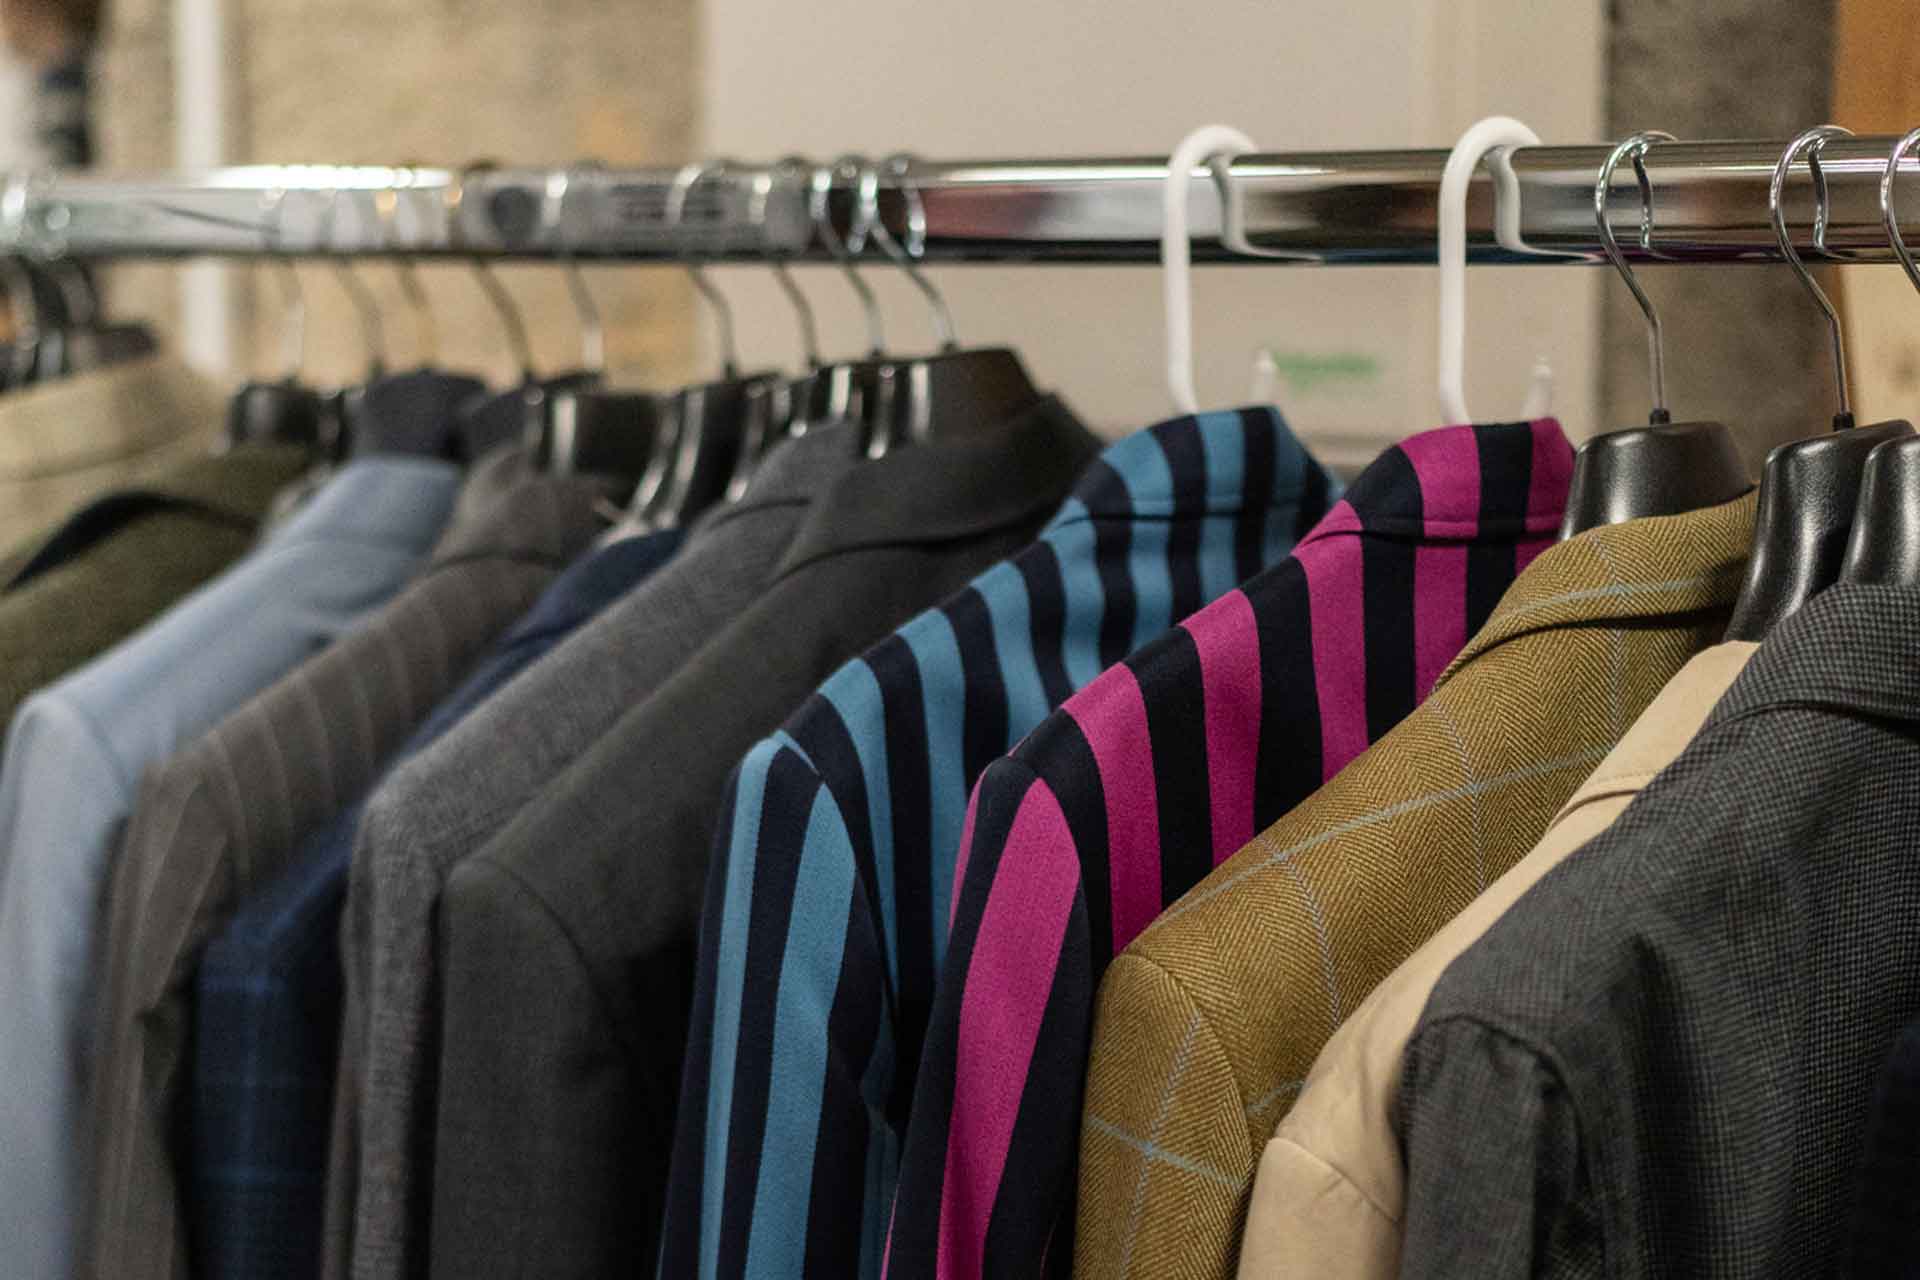 Suits hanging on a rack